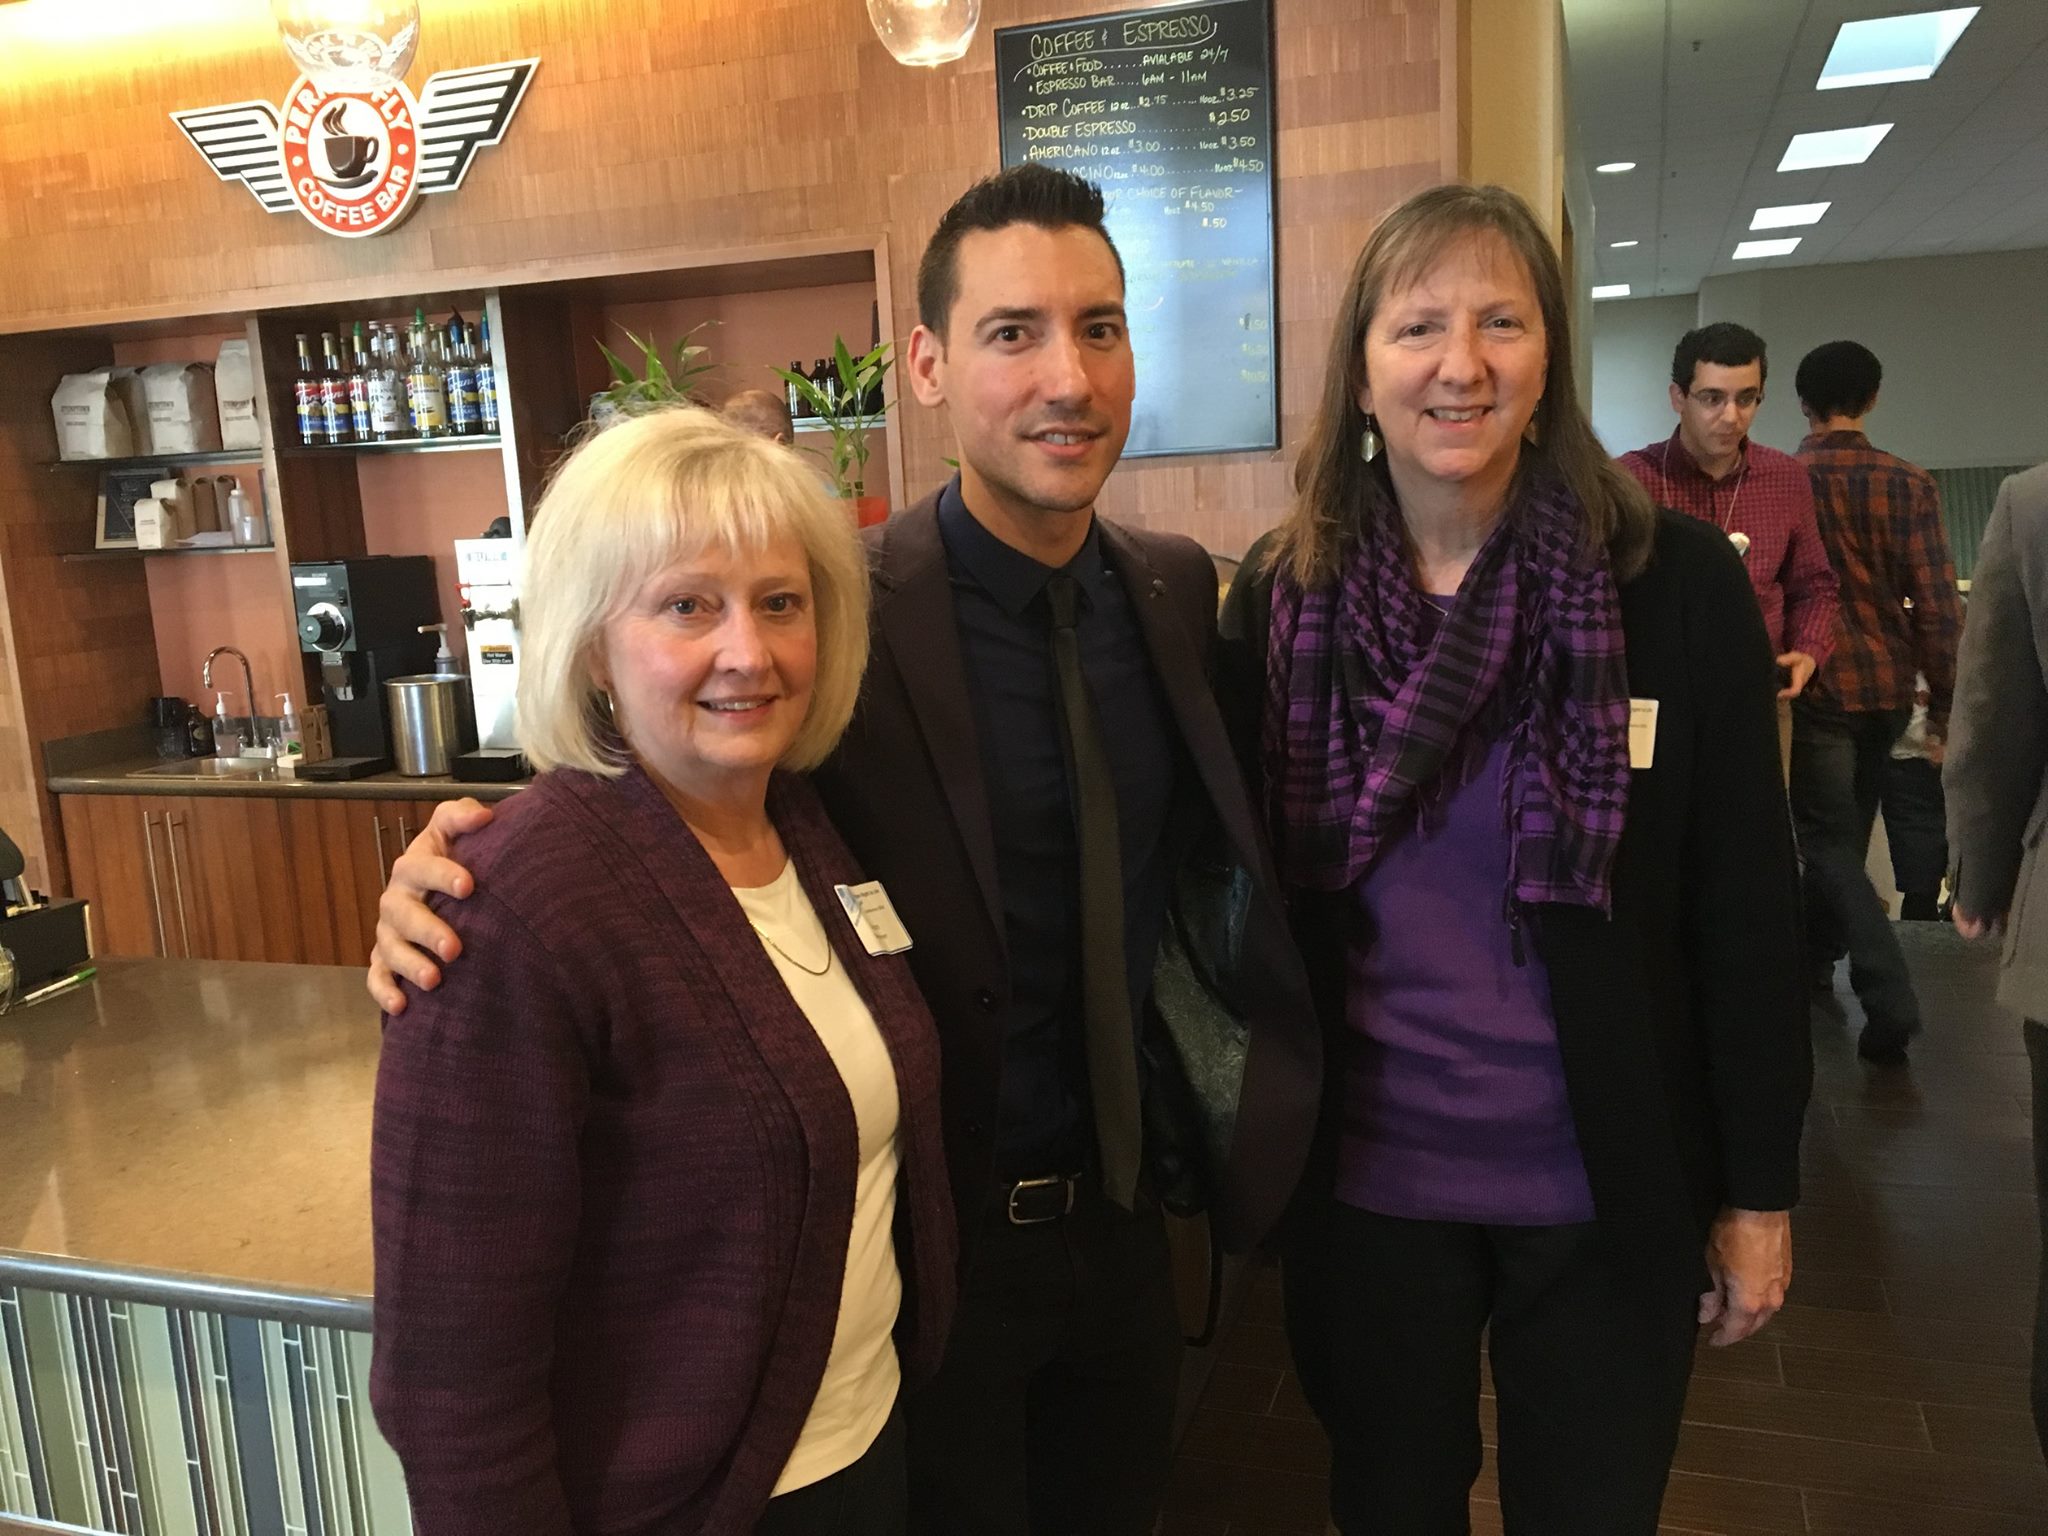 Eternal Perspective Ministries staff members with David Daleiden